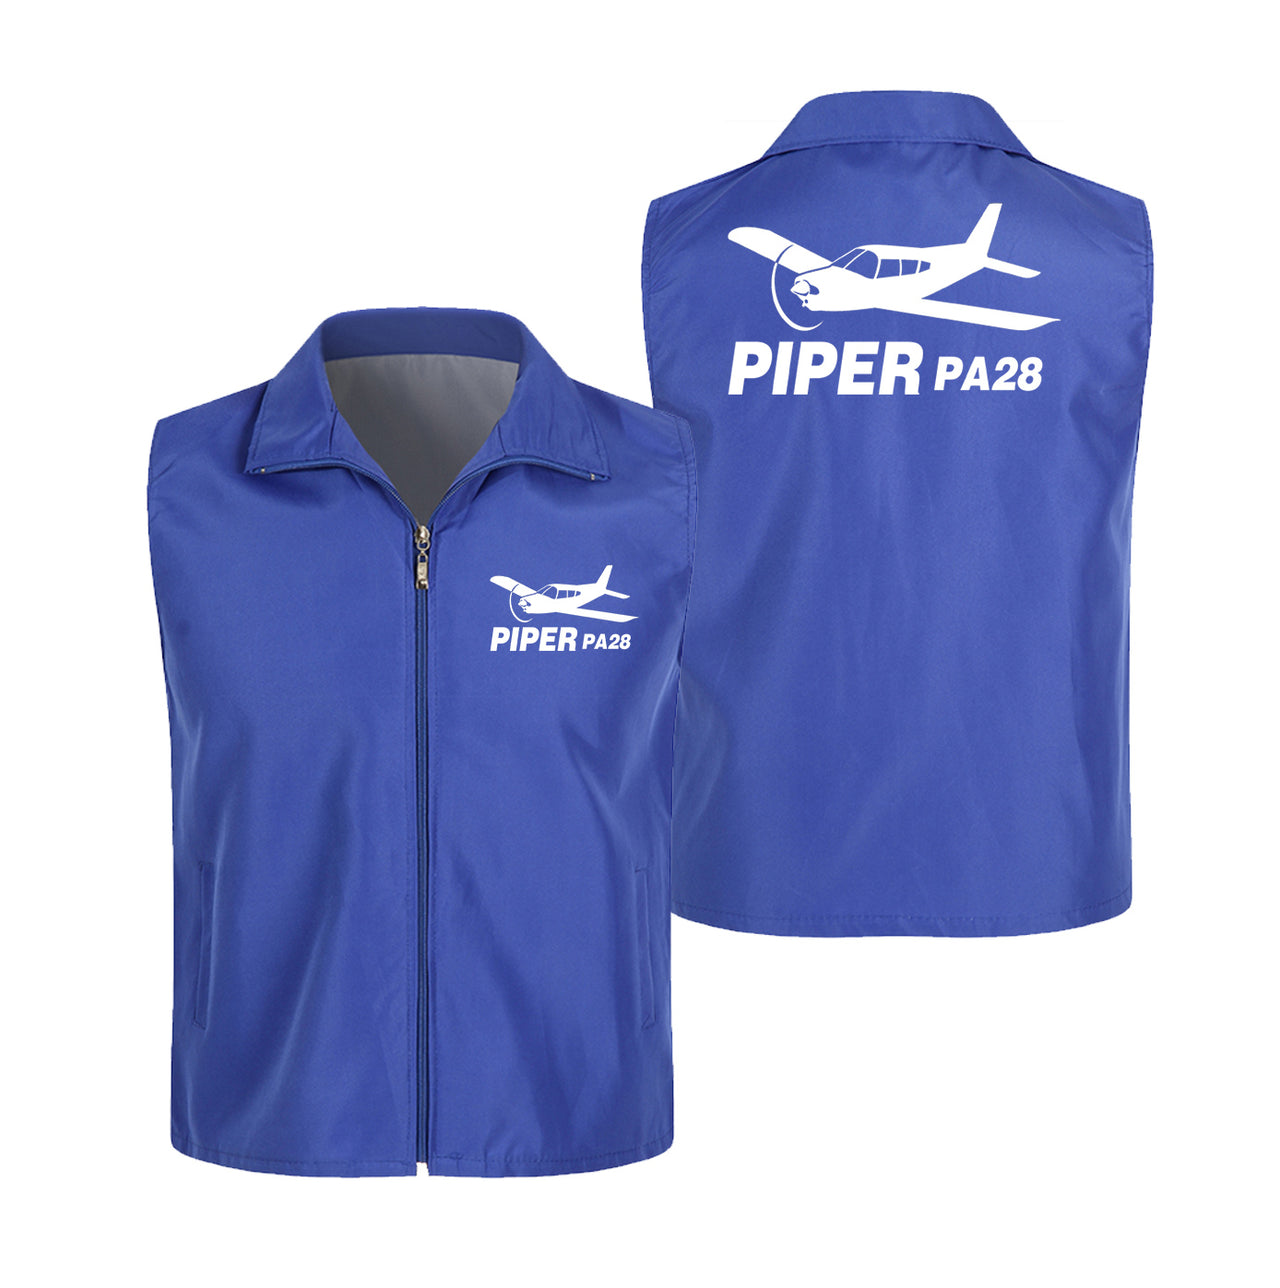 The Piper PA28 Designed Thin Style Vests